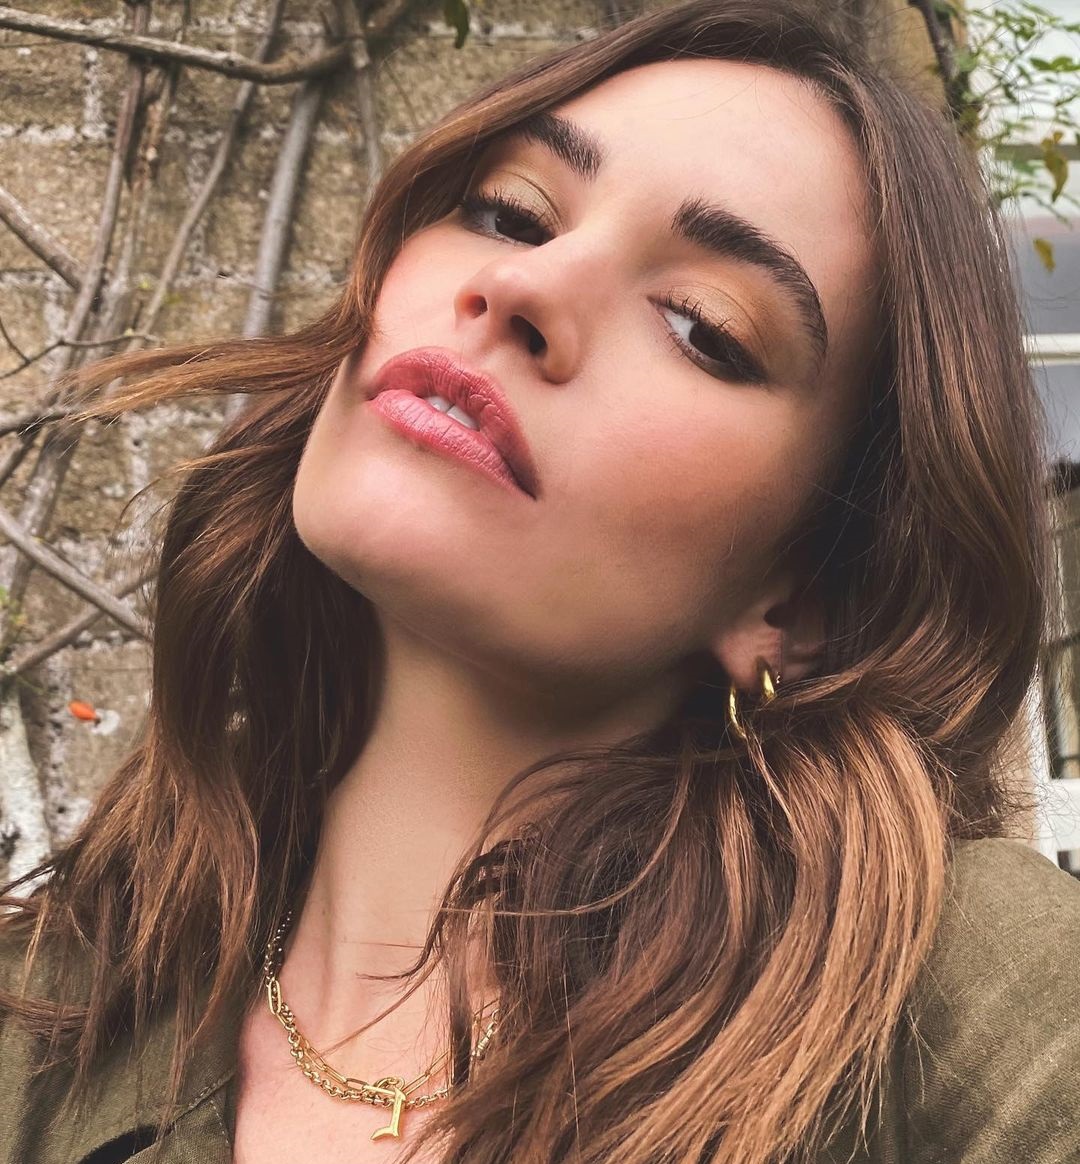 Lily james 18 hottest pics, lily james 18 instagram